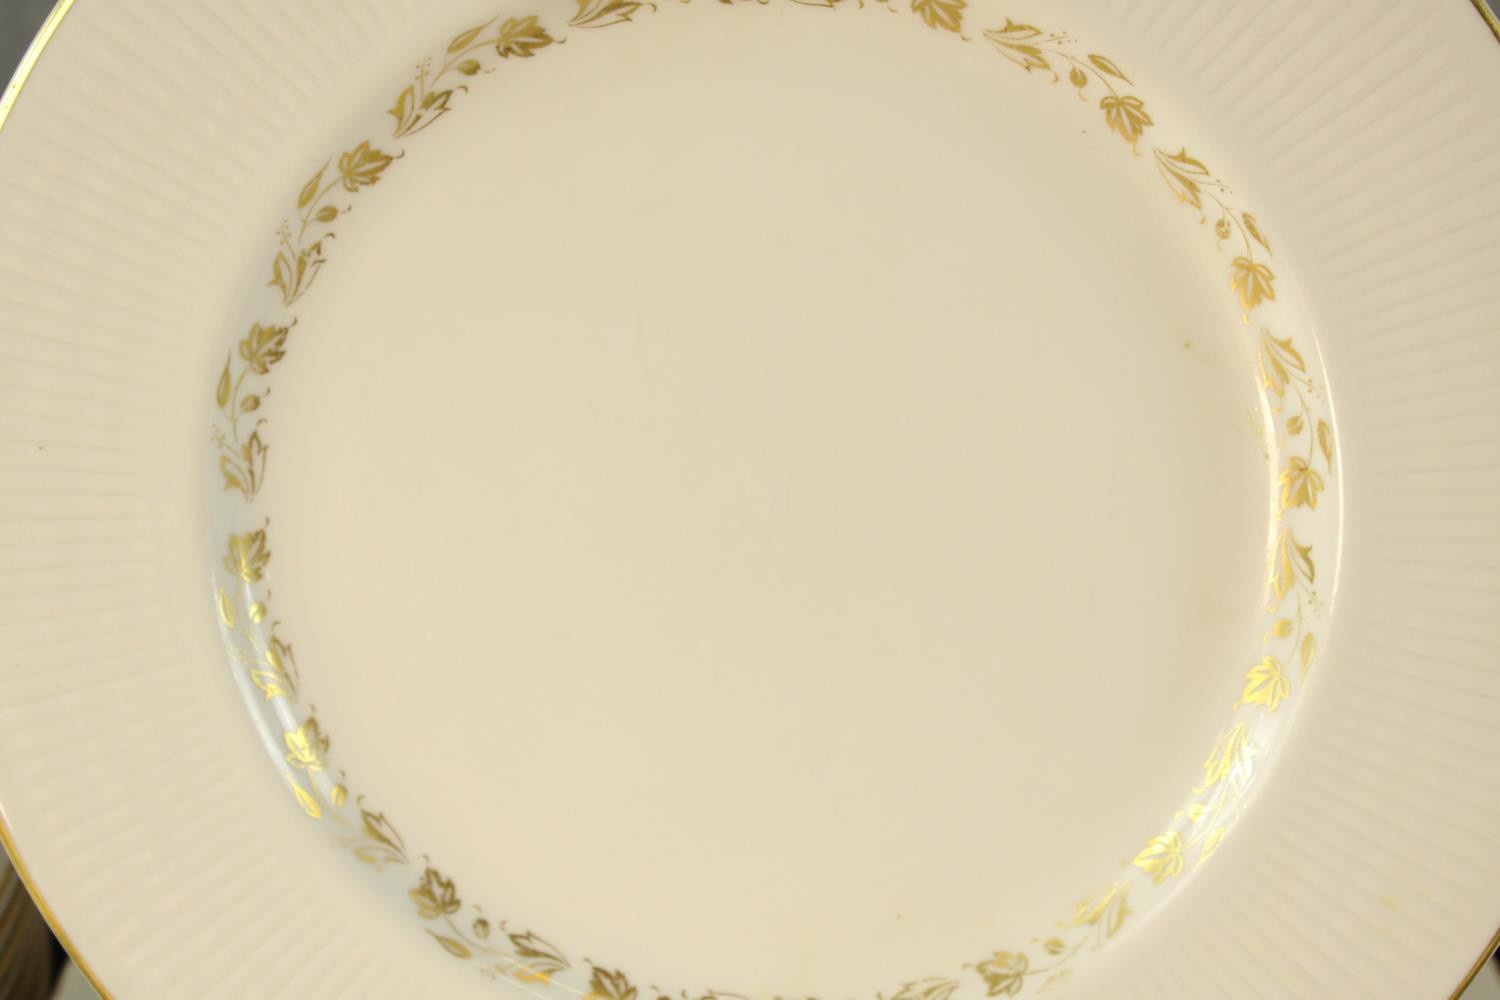 An extensive Royal Doulton Fairfax pattern tea and dinner service comprising of cups, saucers, - Image 7 of 12